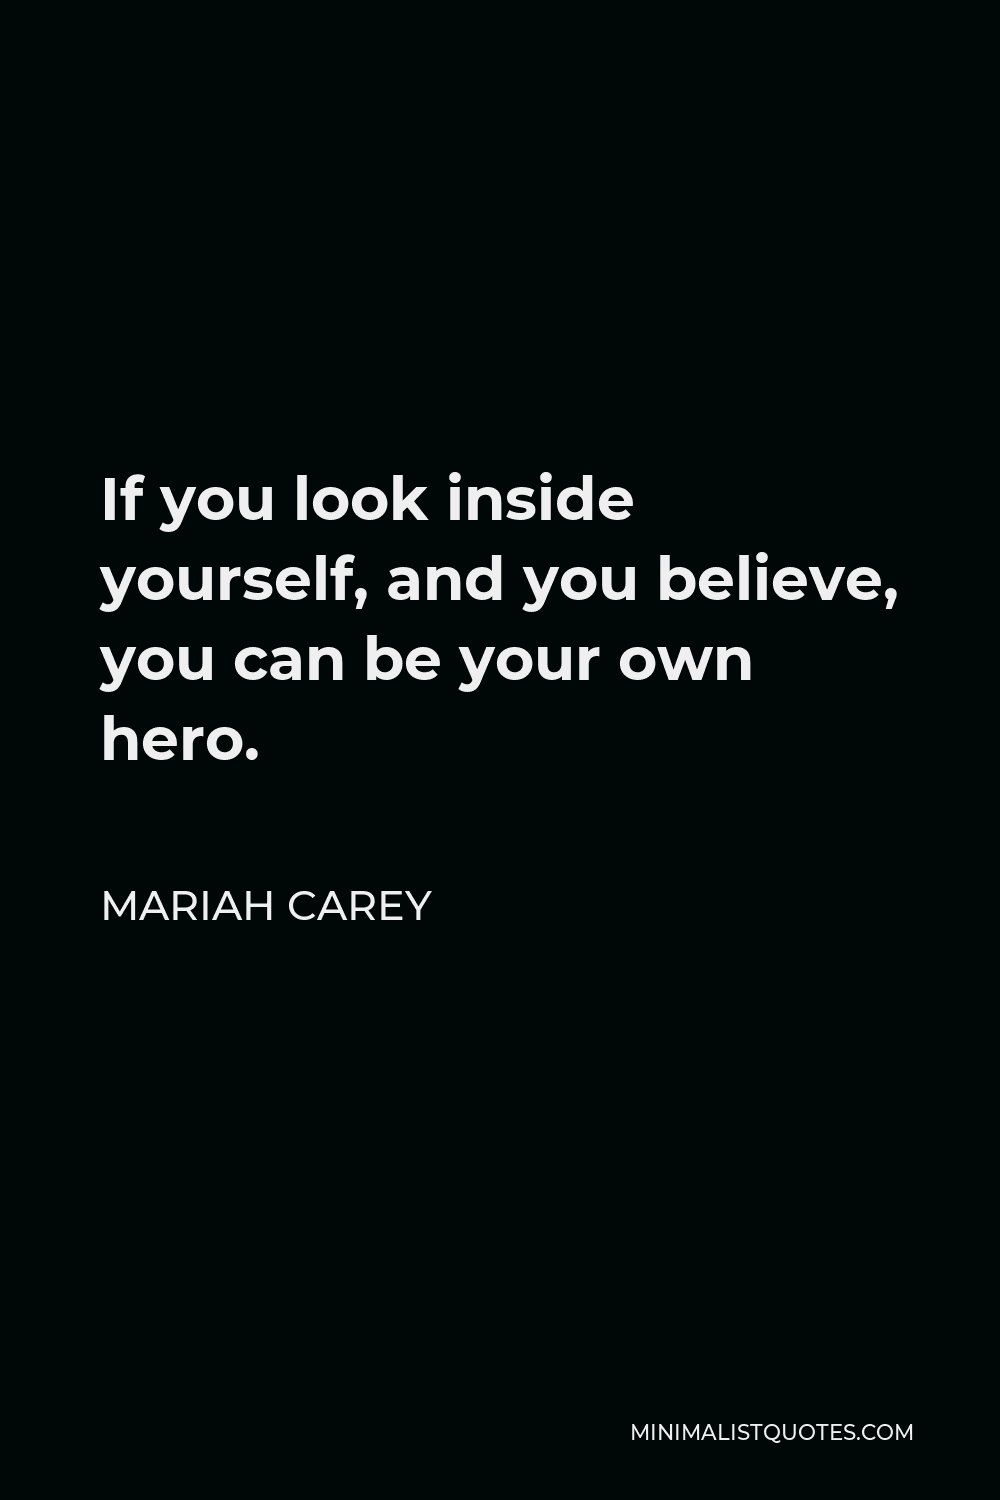 Mariah Carey Quote If You Believe Within Your Soul Just Hold On Tight And Don T Let Go You